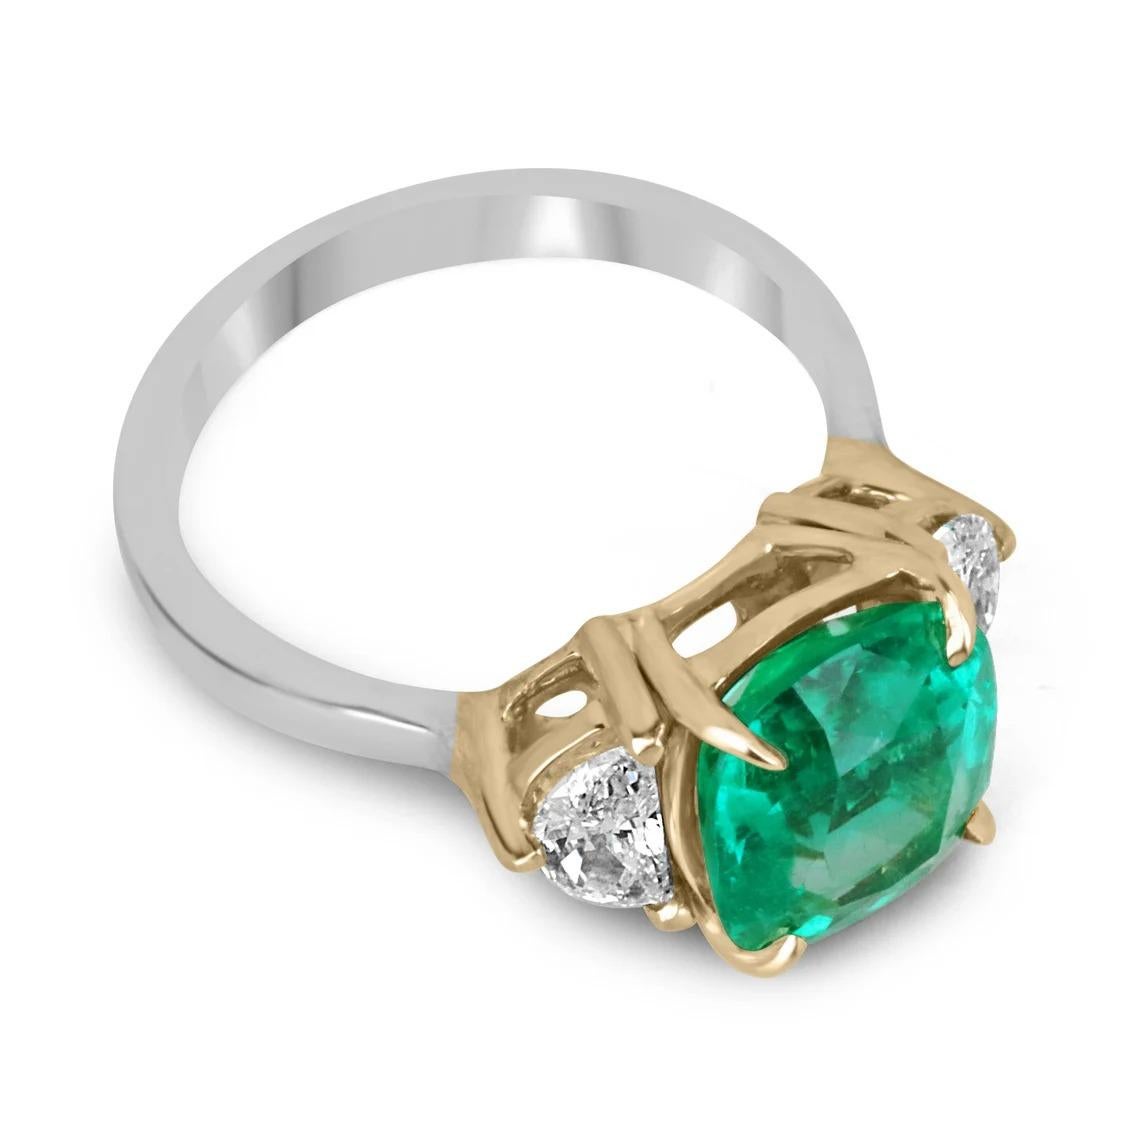 An investment-grade Colombian emerald and half-moon diamond engagement, statement, or right-hand ring. Dexterously crafted in gleaming 18K two-toned gold, this ring features a natural Colombian emerald cushion cut from the famous Muzo mines. Set in